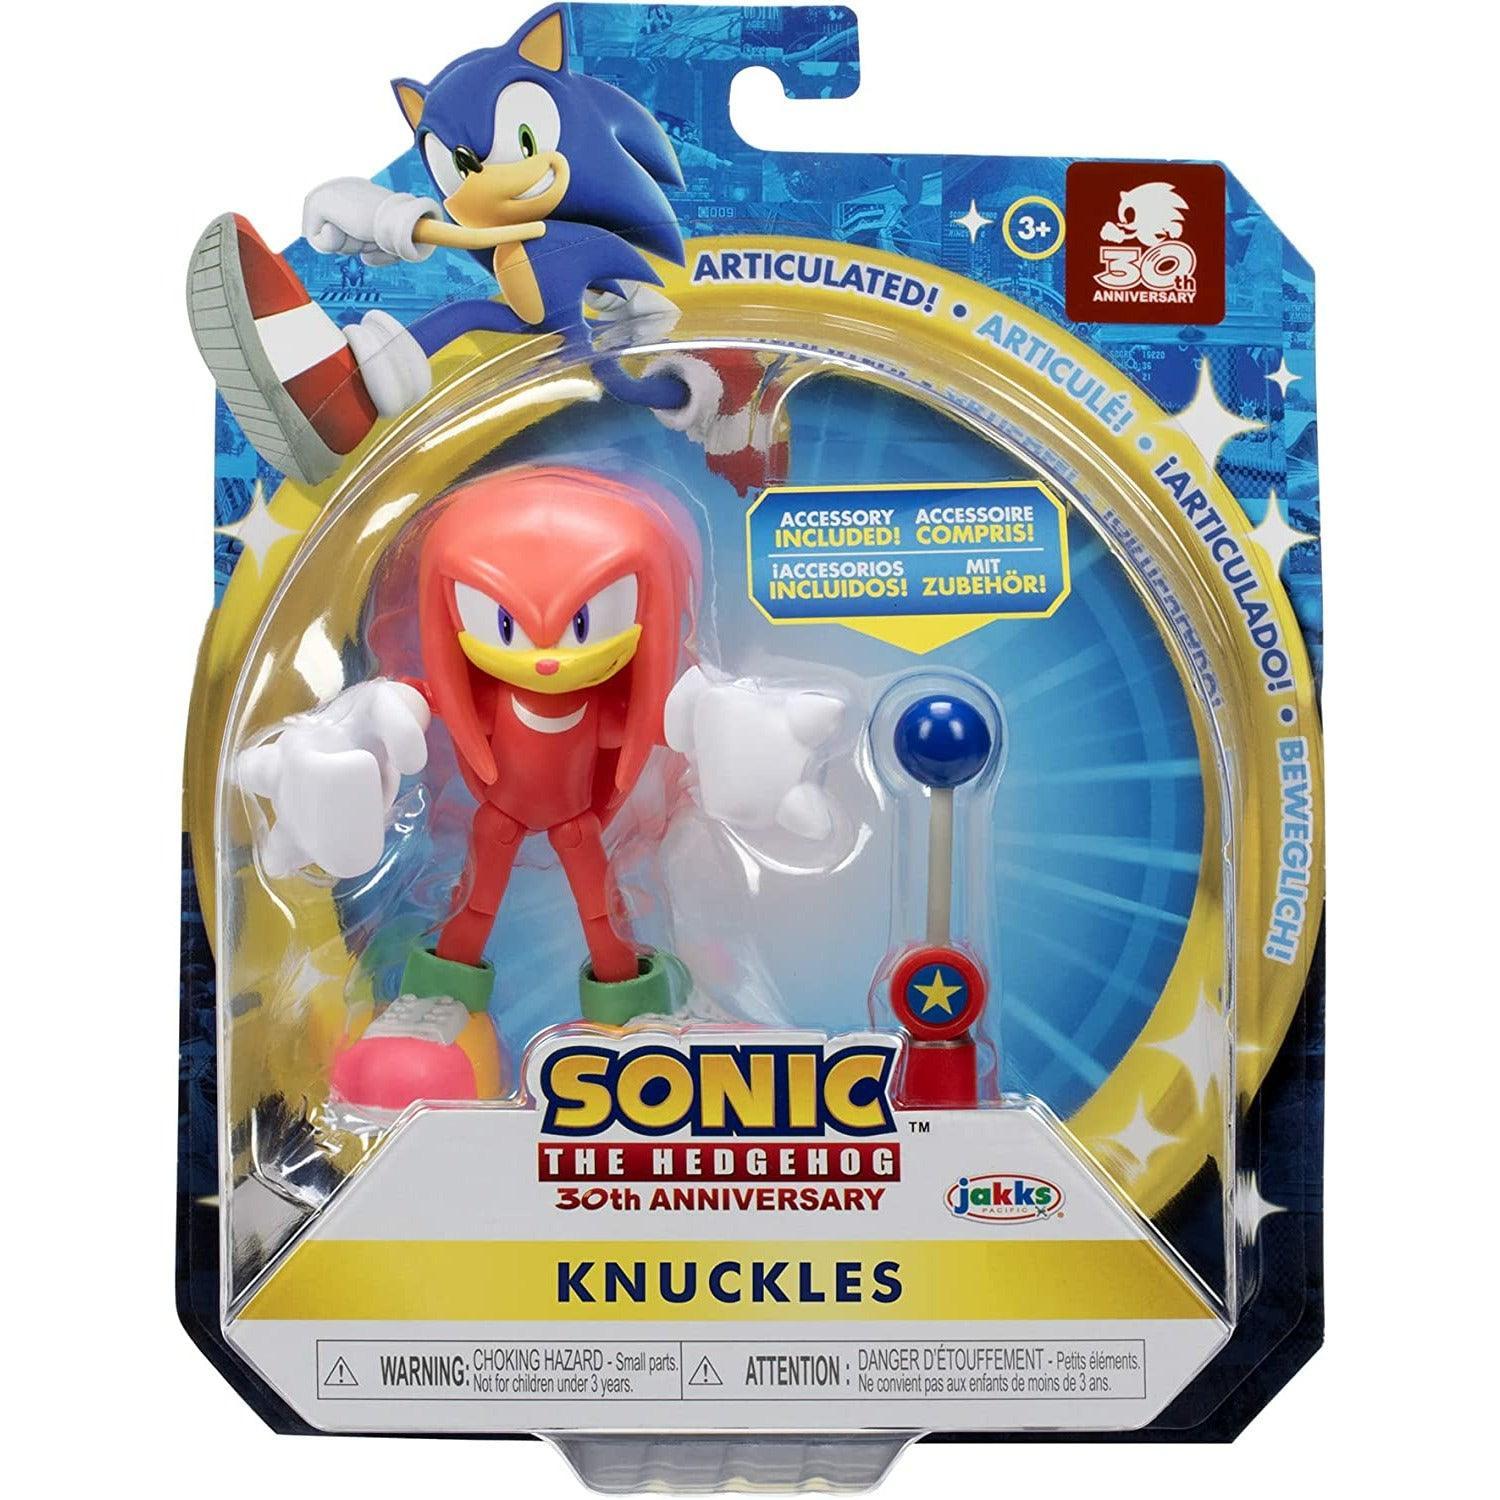 Sonic The Hedgehog 4-Inch Action Figure Modern Knuckles with Blue Checkpoint Collectible Toy - BumbleToys - 5-7 Years, 8-13 Years, Boys, OXE, Pre-Order, Sonic